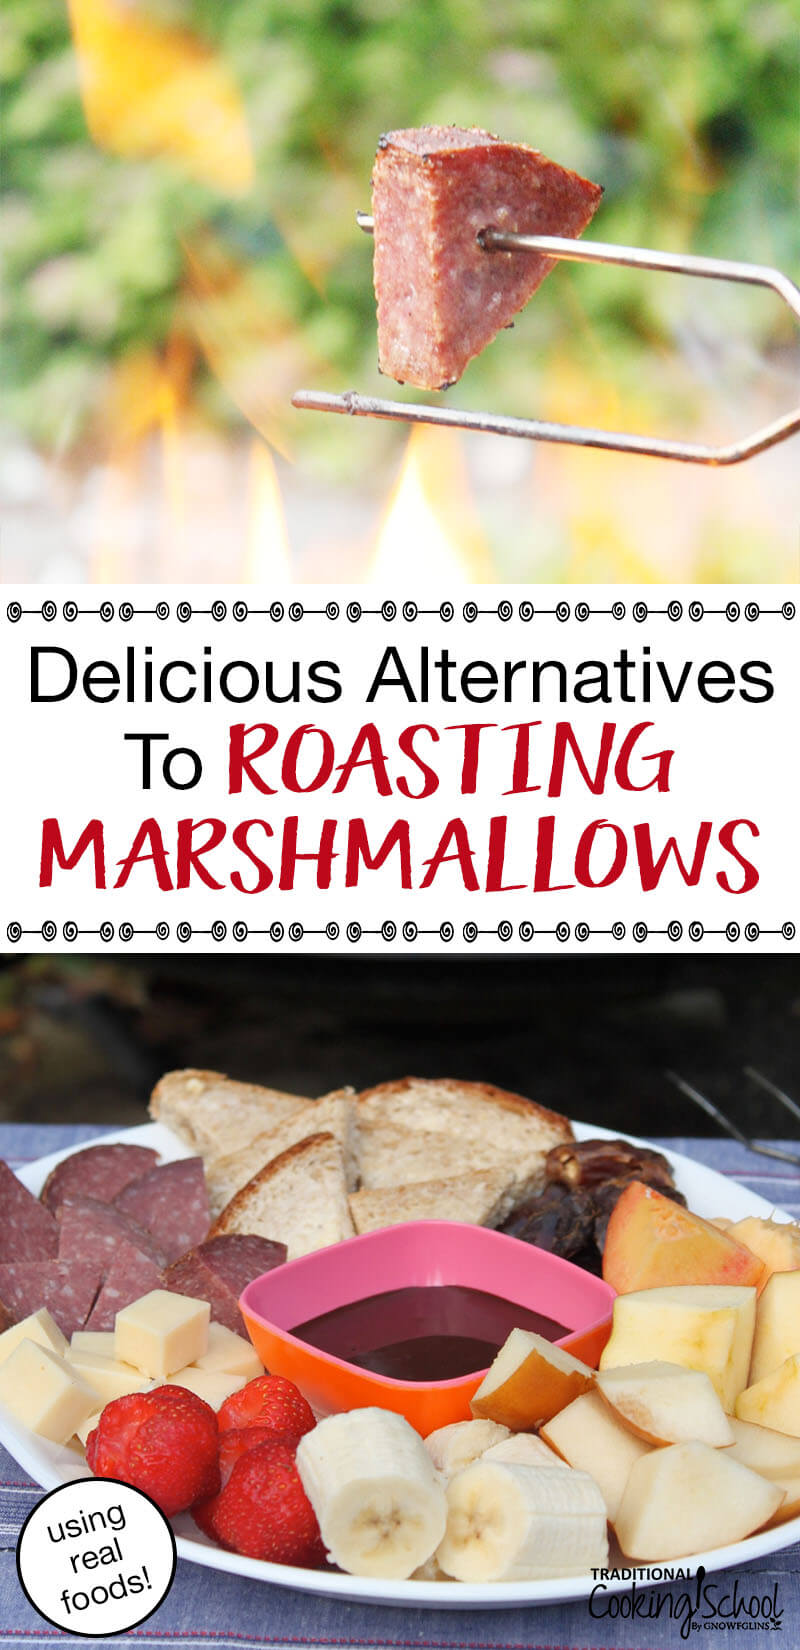 Delicious Real Food Alternatives to Roasting Marshmallows | With food-allergies and a wide variety of diets to accommodate, my family set out to experiment with alternatives to the usual campfire fare. Here are our favorite tasty (and healthy!) alternatives, plus ways to spice-it-up, dip-it-up, and turn it into a special treat. | TraditionalCookingSchool.com